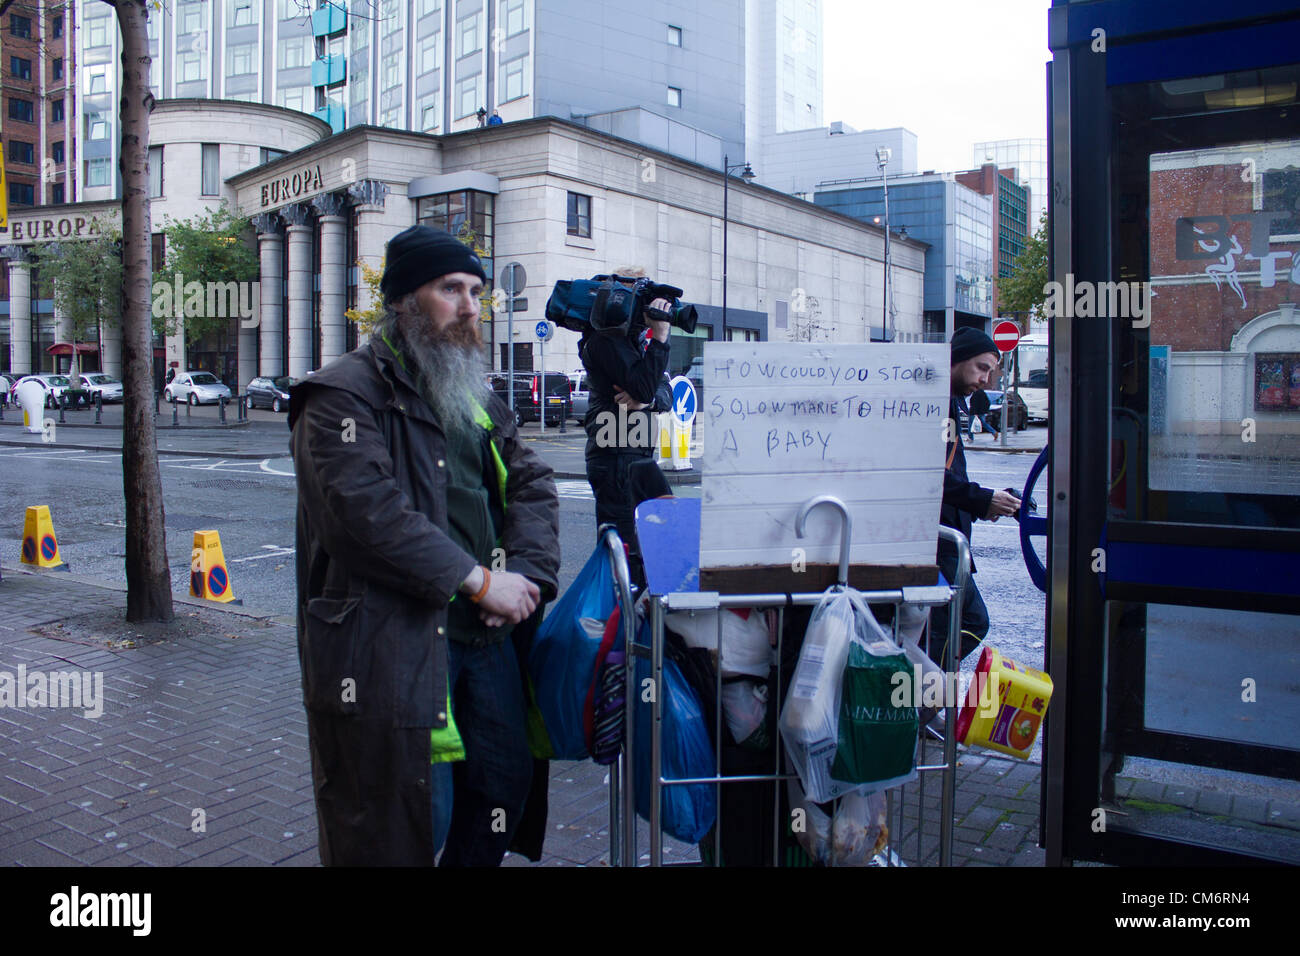 Belfast, UK. 18th October, 2012. Even the homeless protesting at at the opening of the Marie stopes clinic in Belfast. The private clinic, which opened today, offers abortions under the law in Northern Ireland. Stock Photo